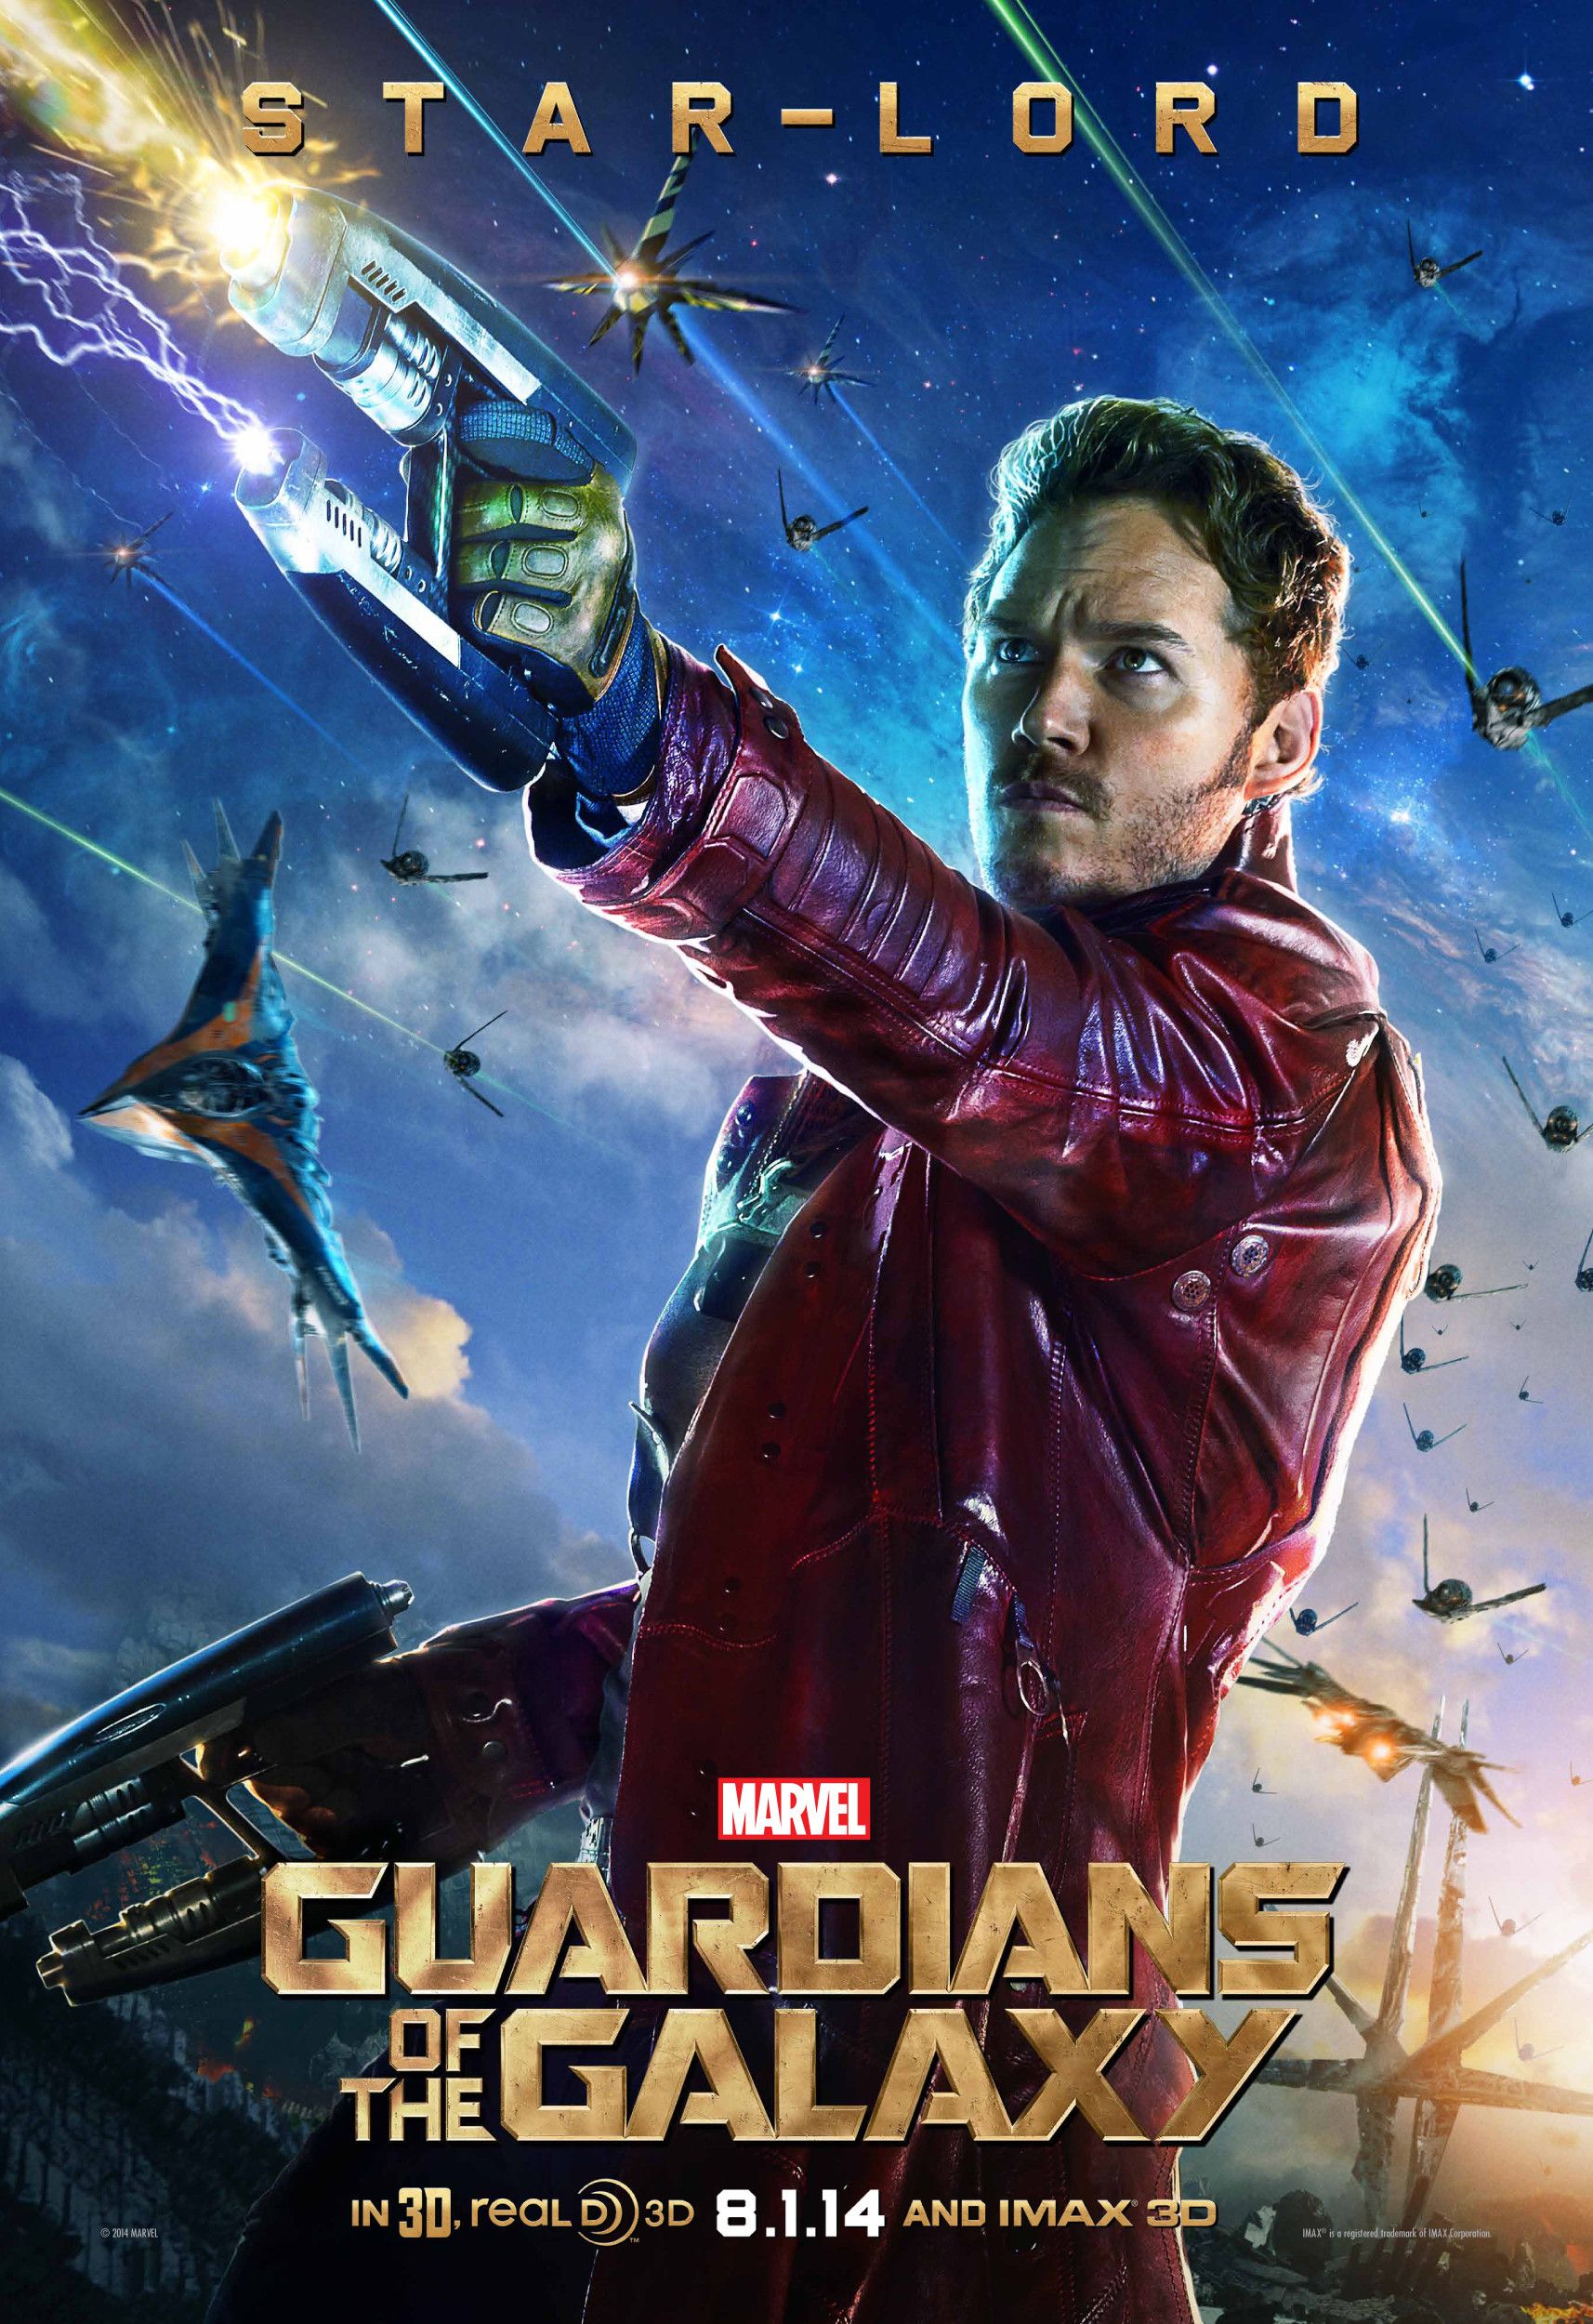 Guardians of the Galaxy Star-Lord Poster